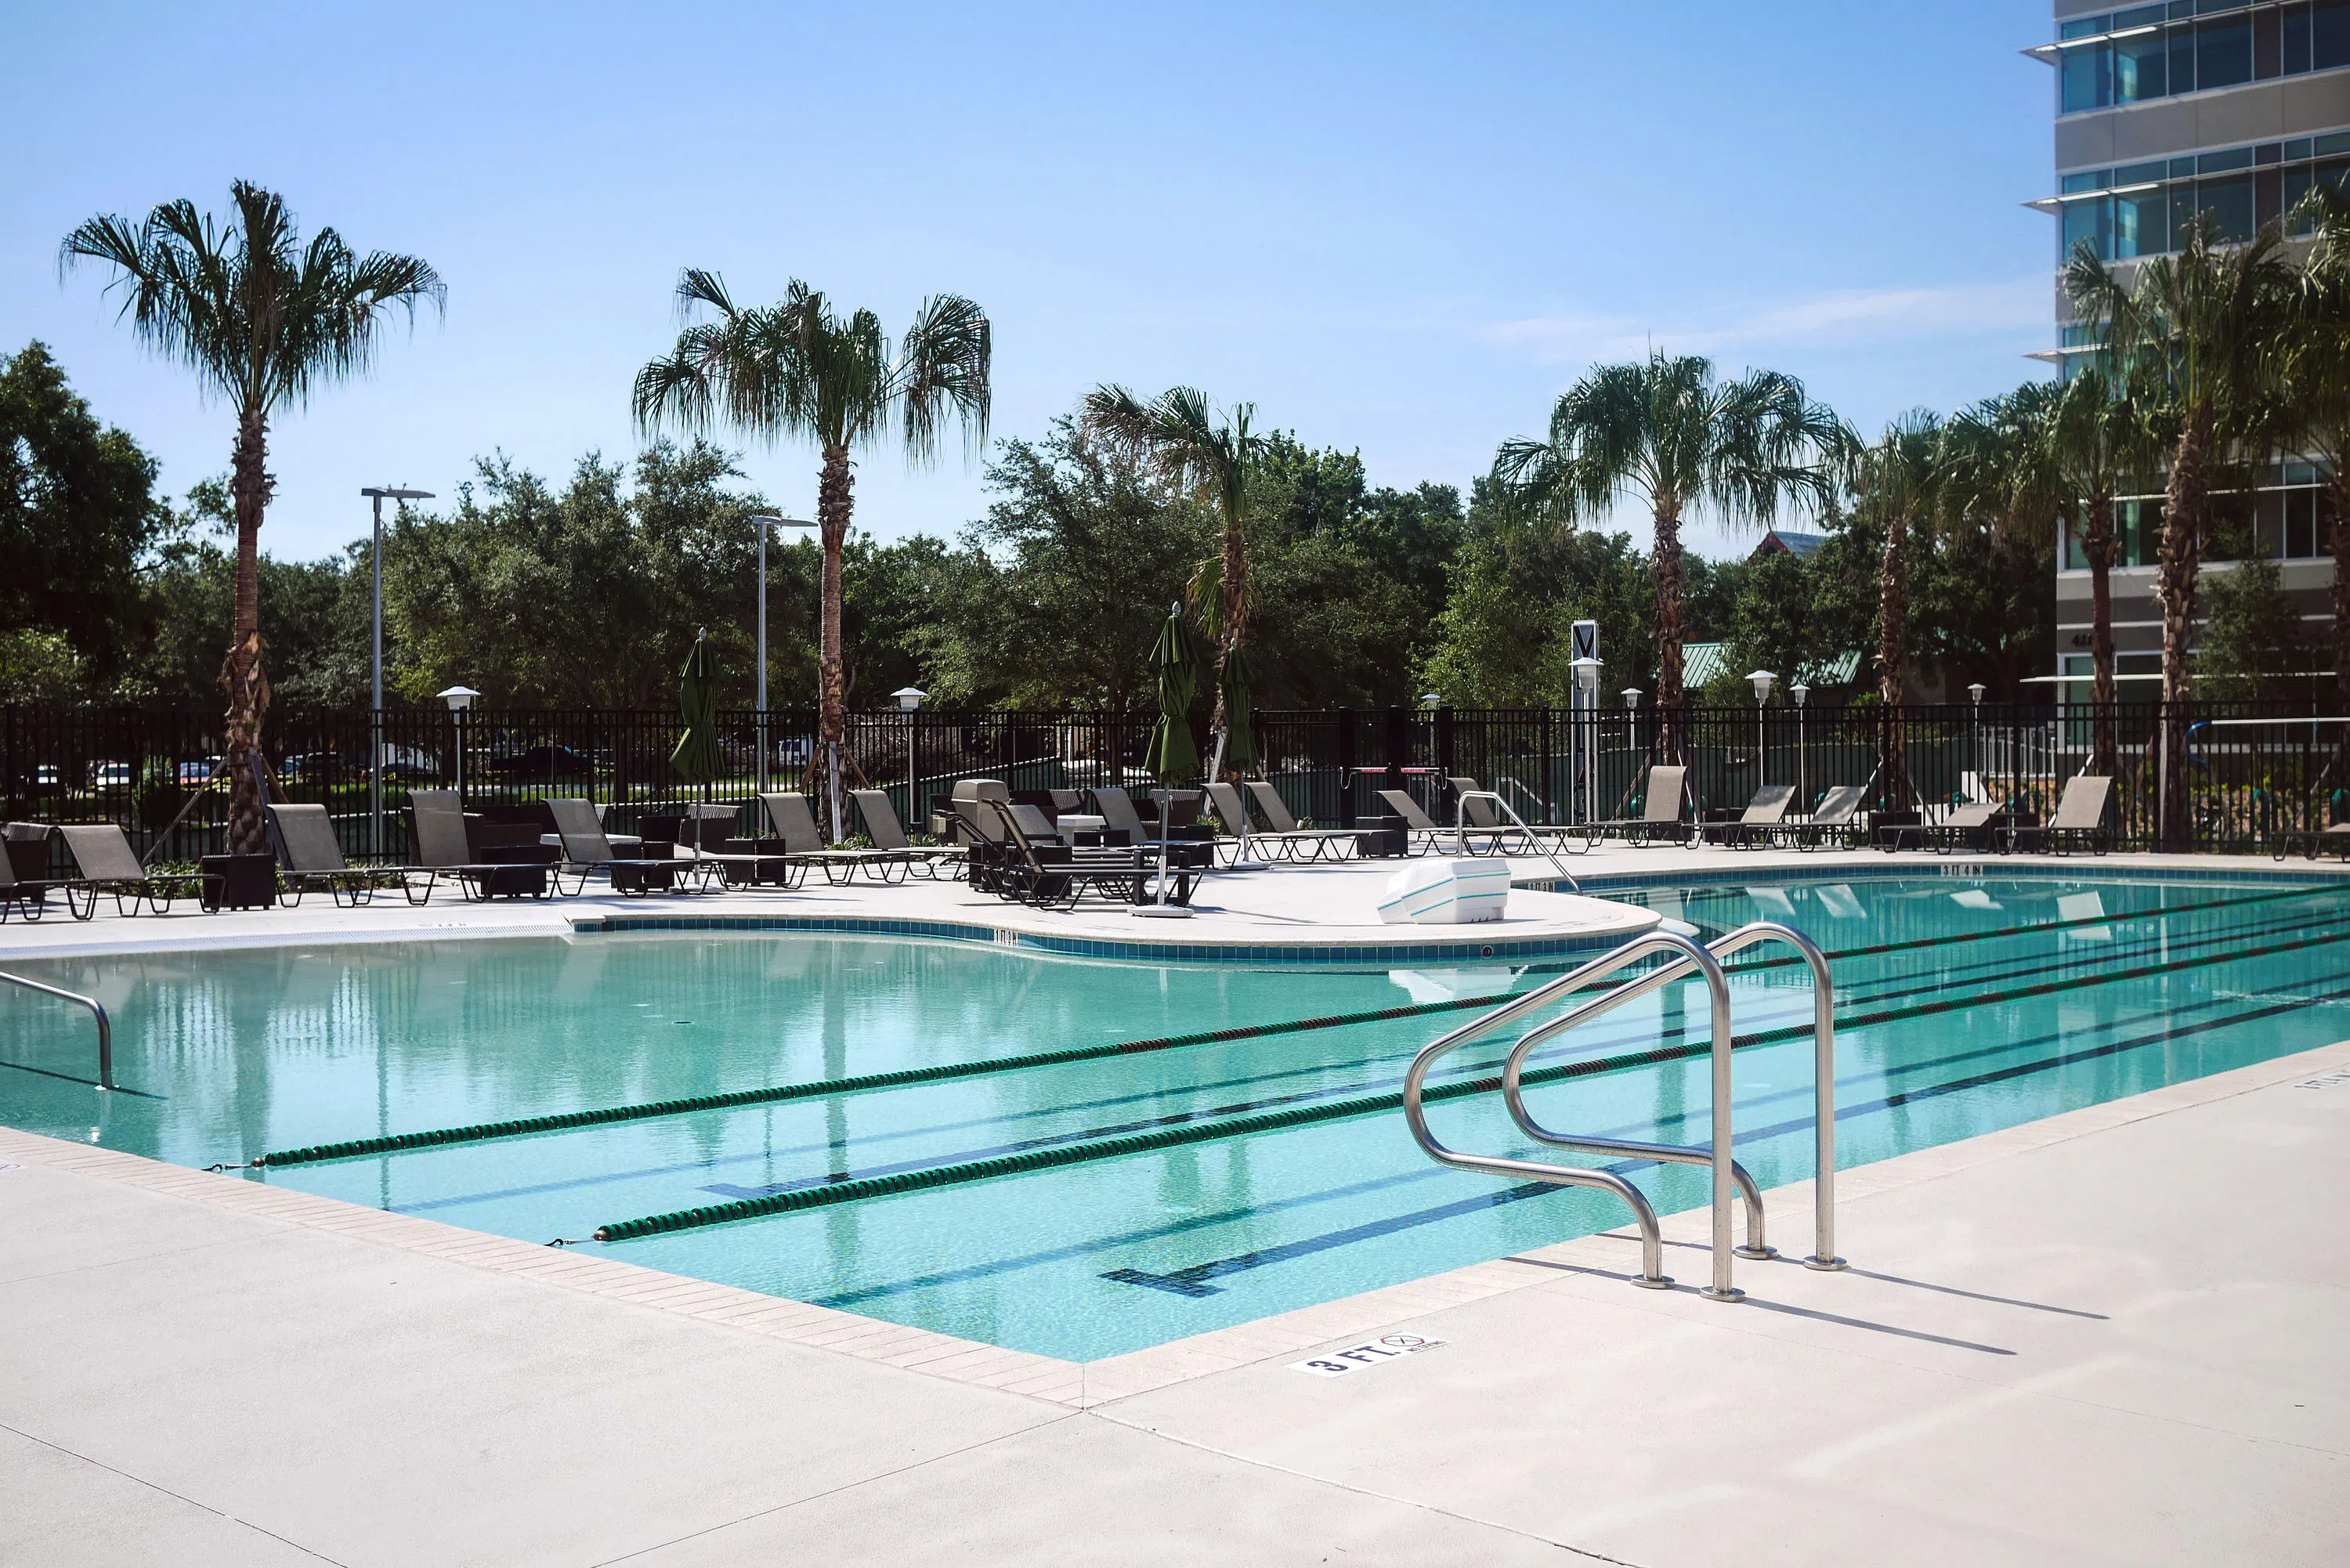 The outdoor pool at The Fit.